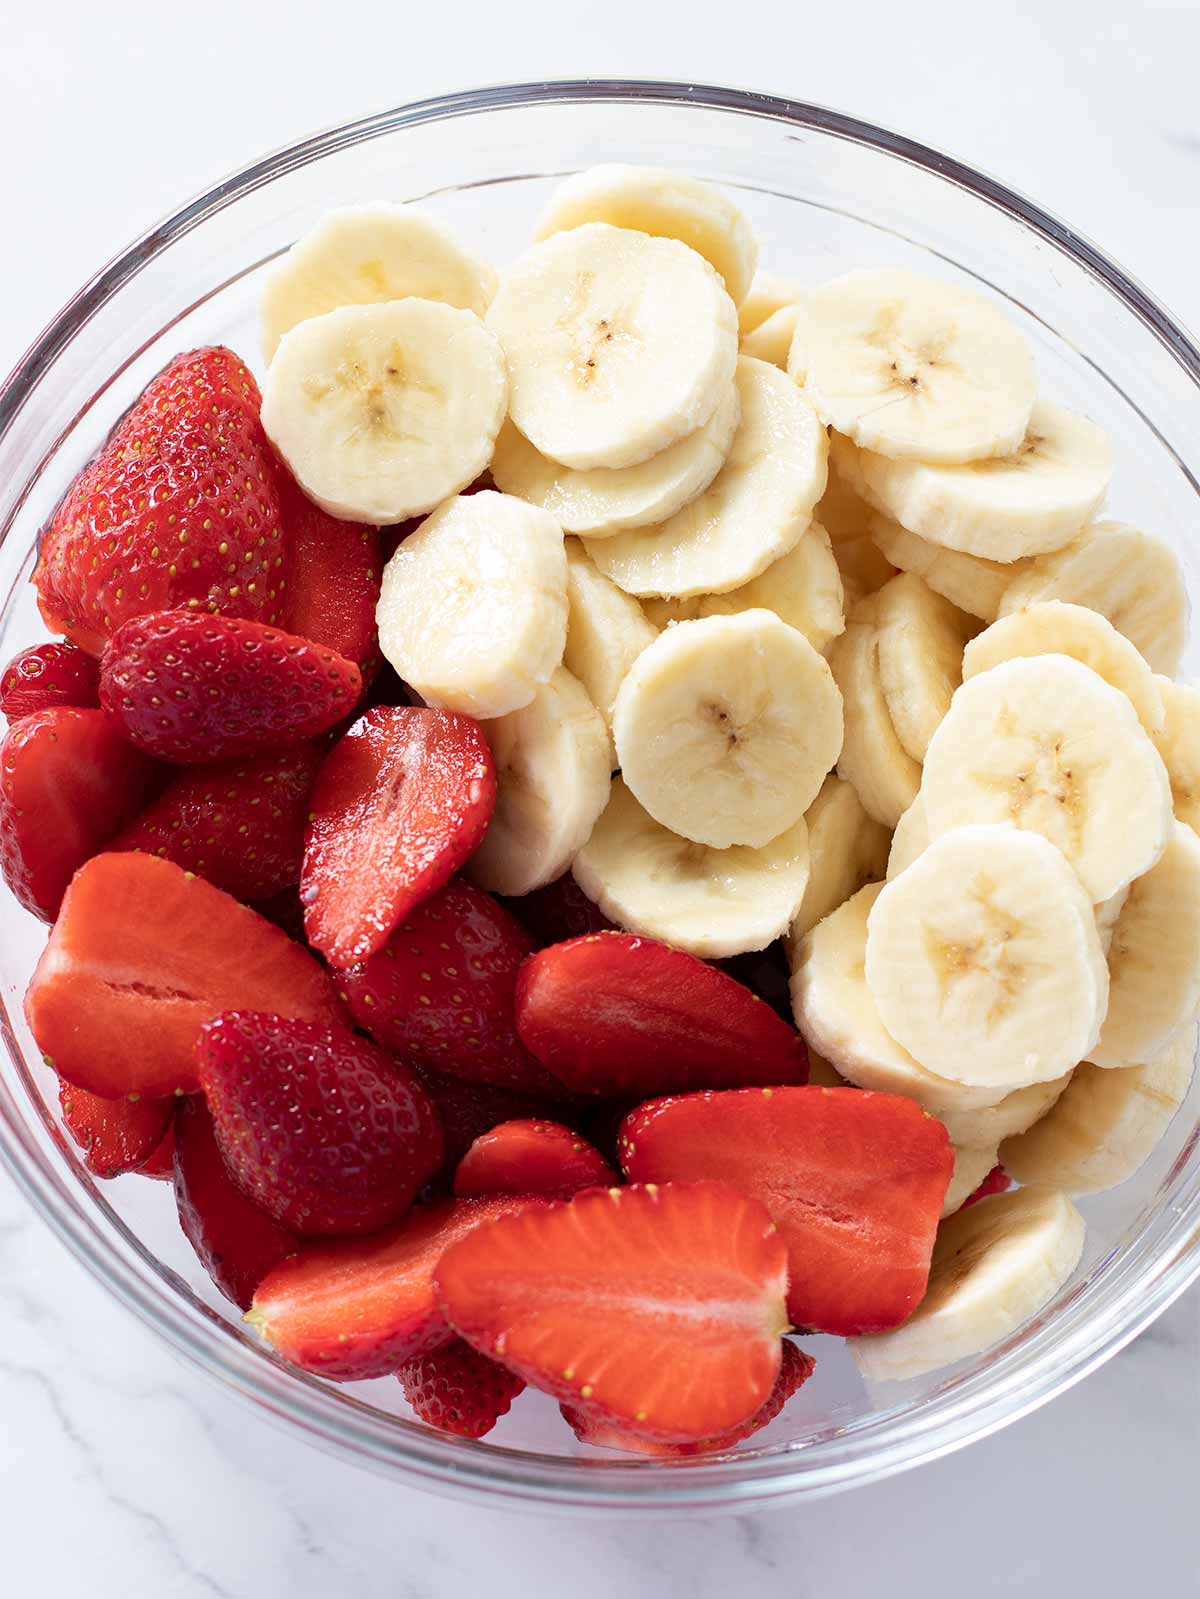 Halved fresh strawberries and sliced bananas in a salad bowl